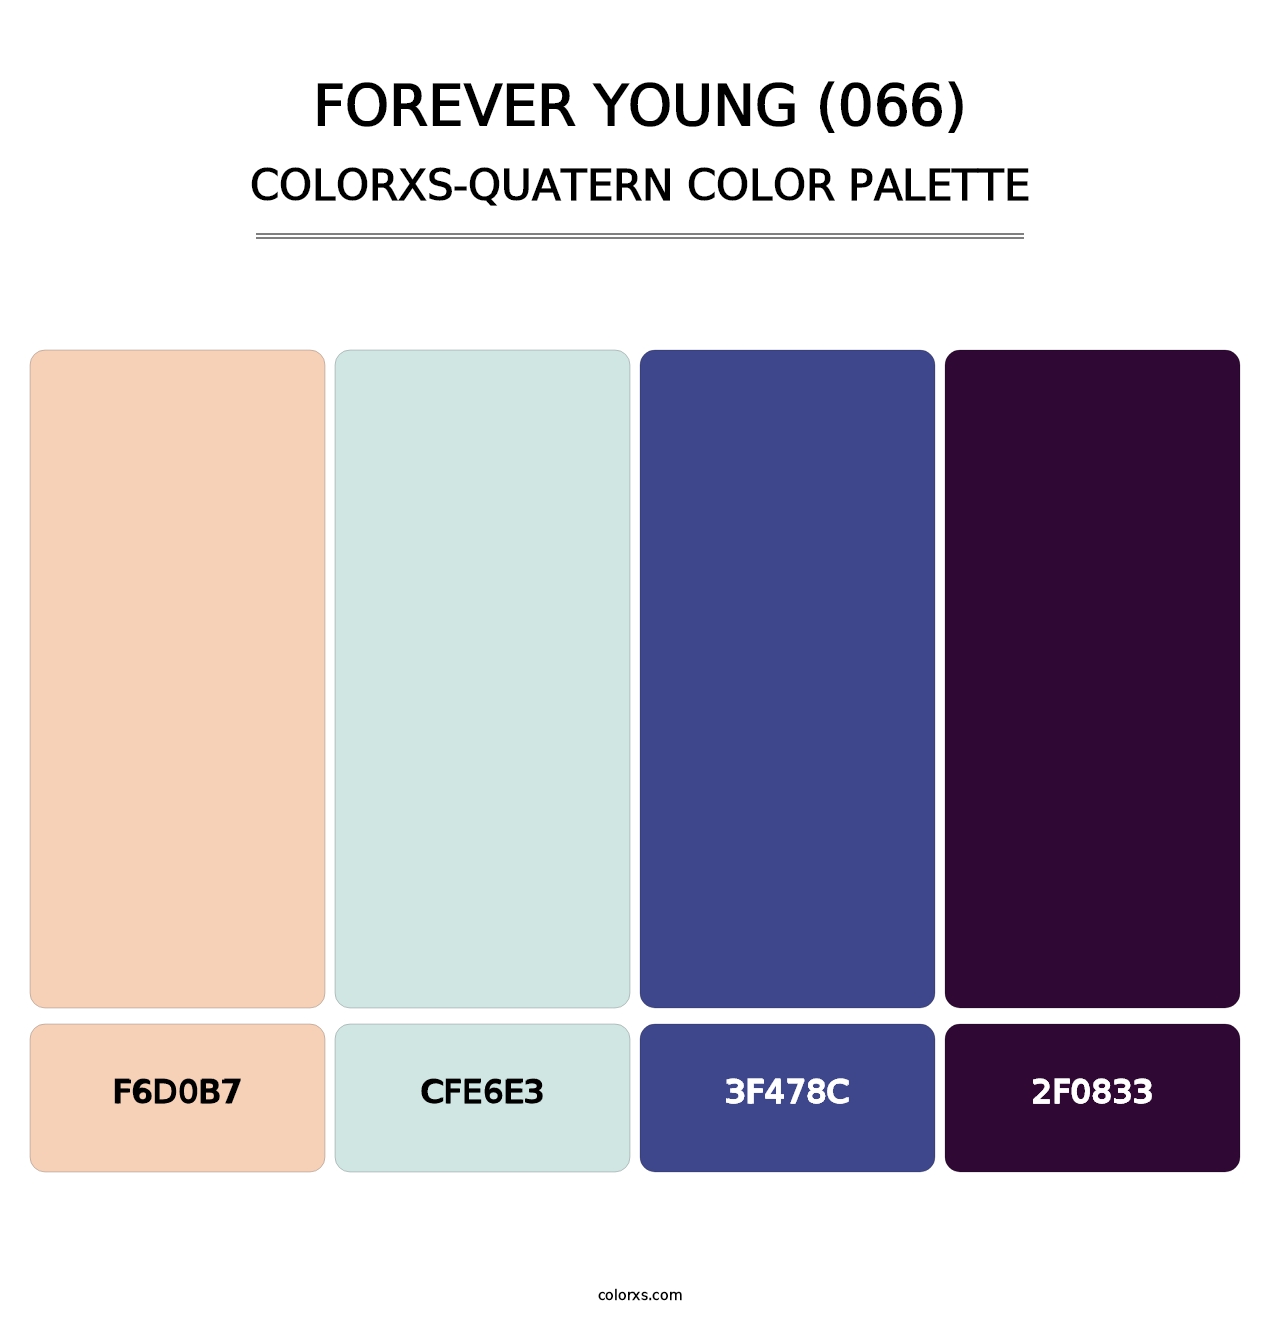 Forever Young (066) - Colorxs Quatern Palette